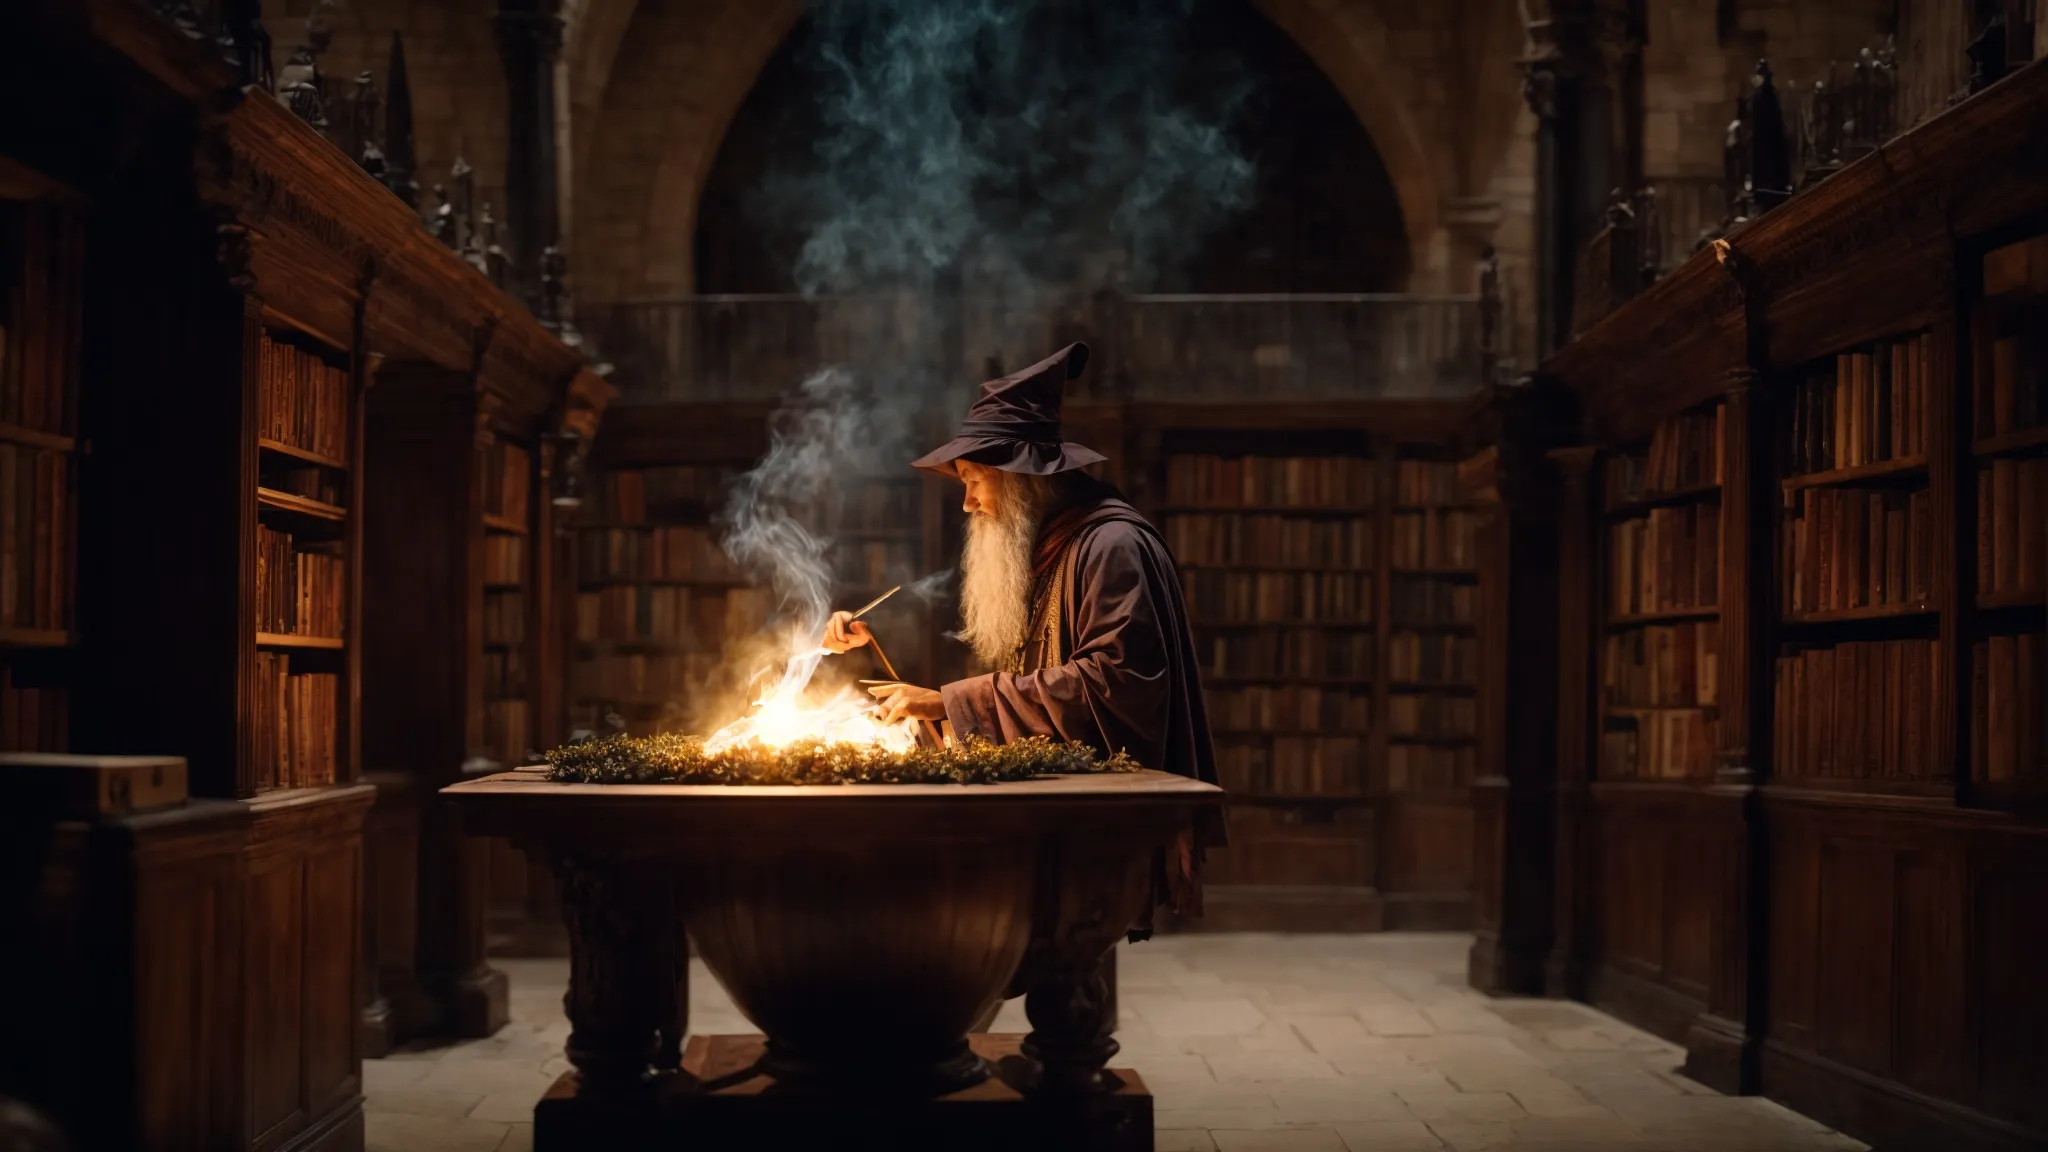 a wizard-like figure conjuring glowing words from a cauldron amidst an ancient library setting.